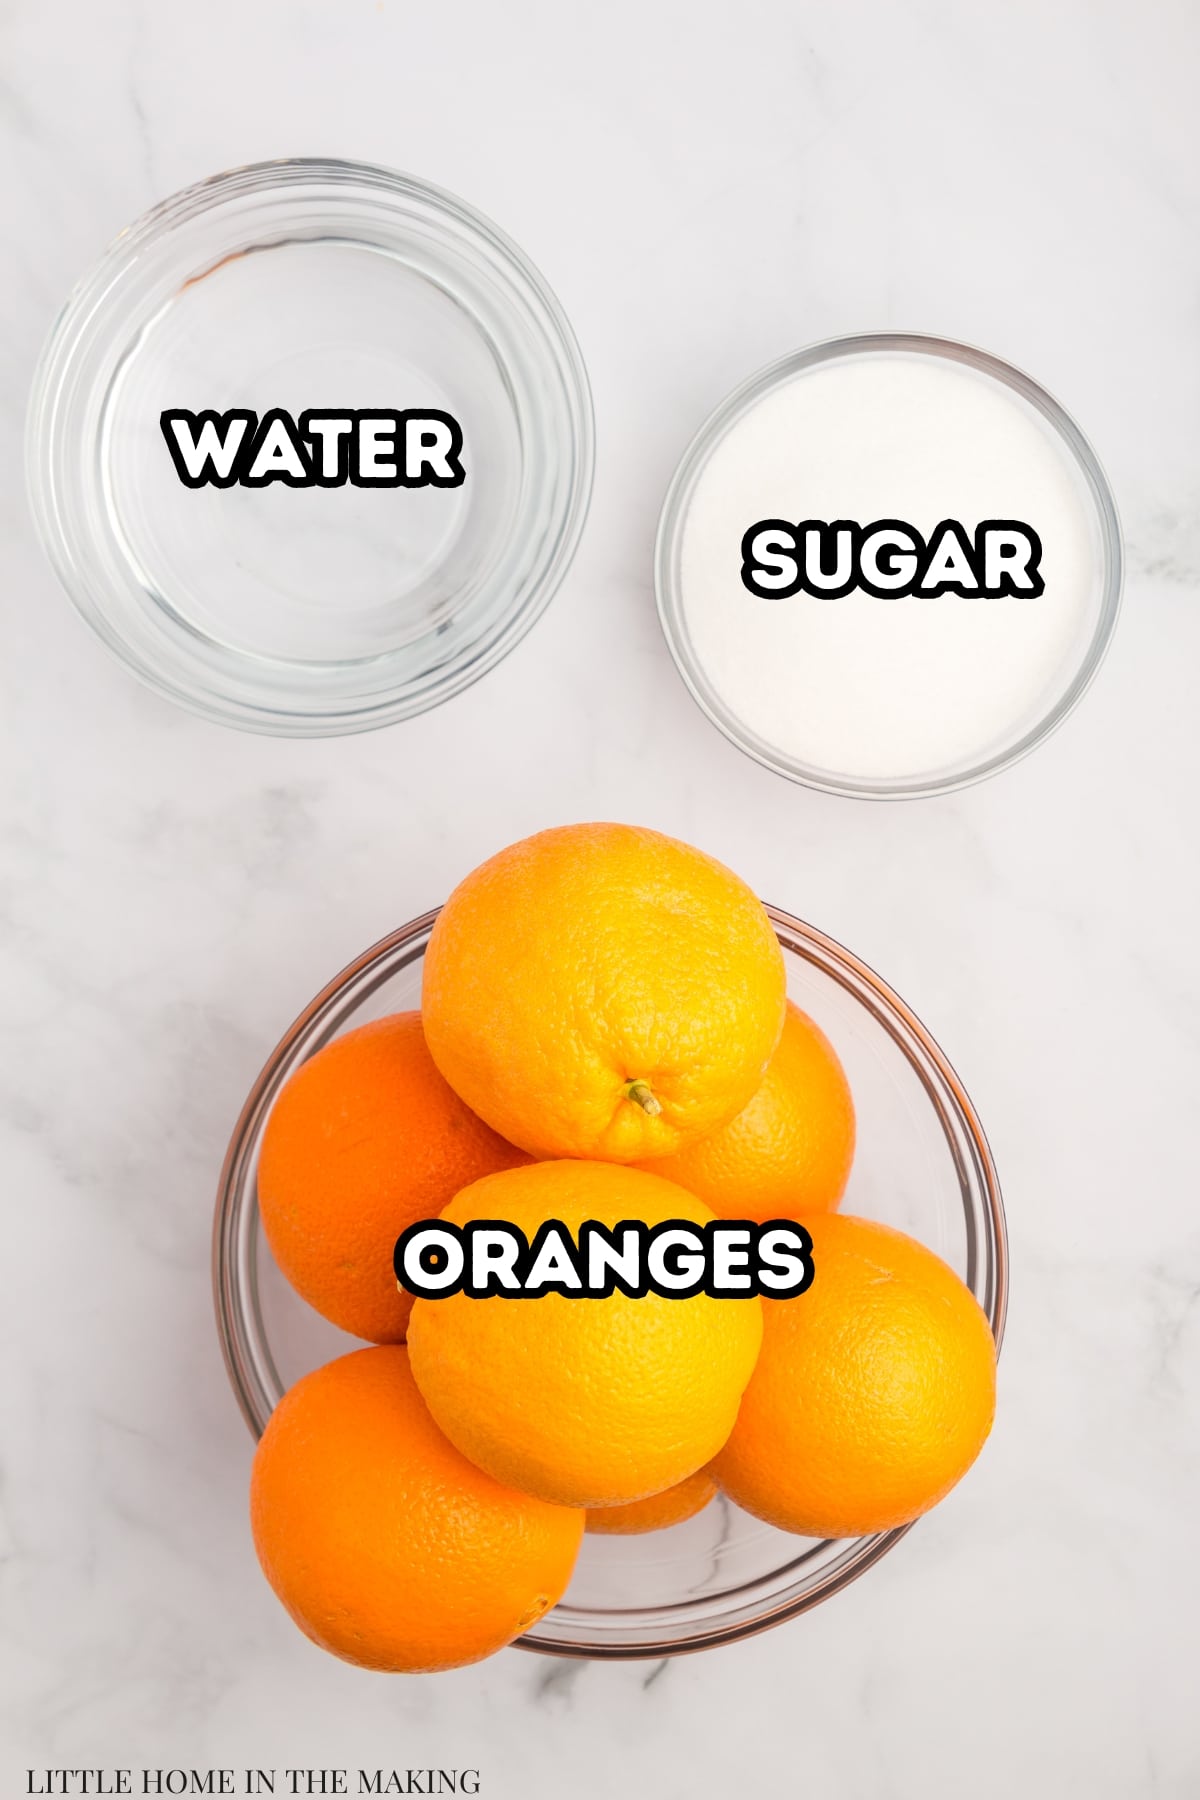 The ingredients needed to make home canned oranges: water, sugar, and oranges.